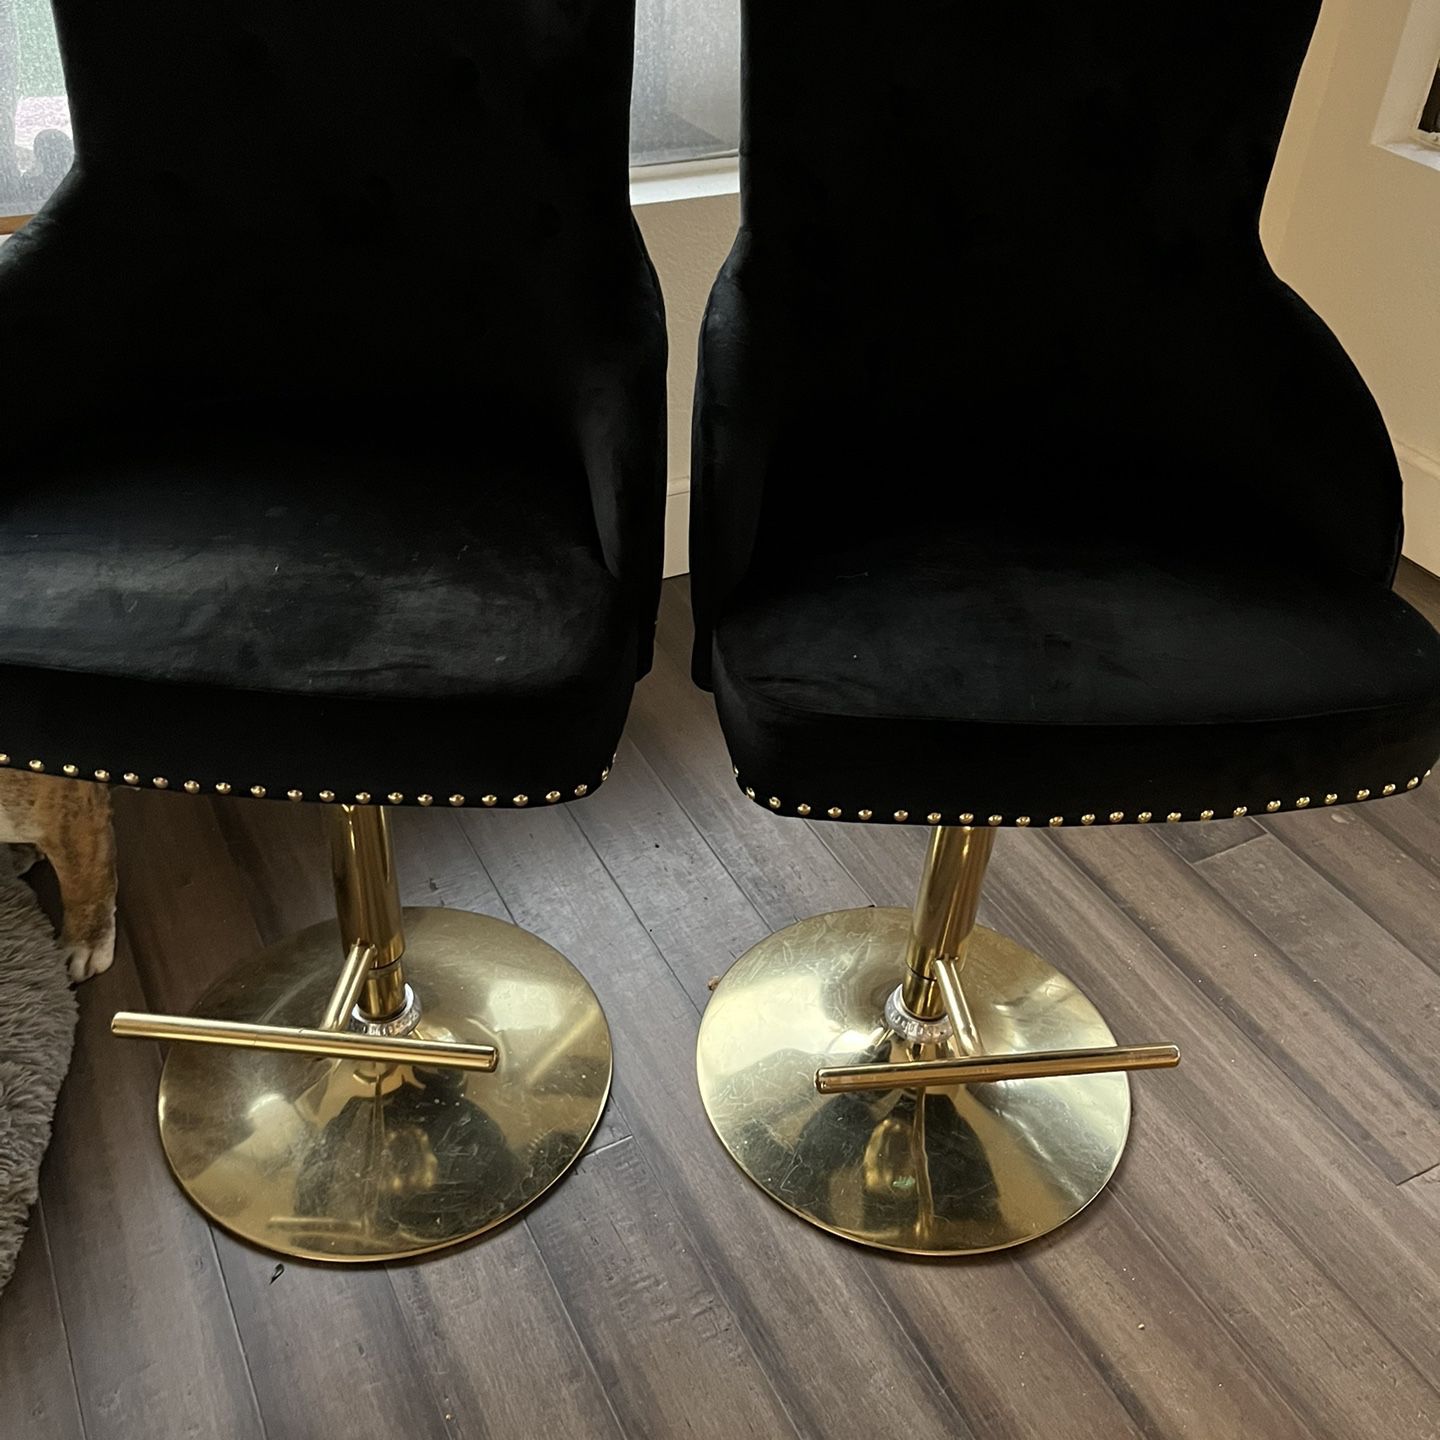 2 Black And Gold Barstools